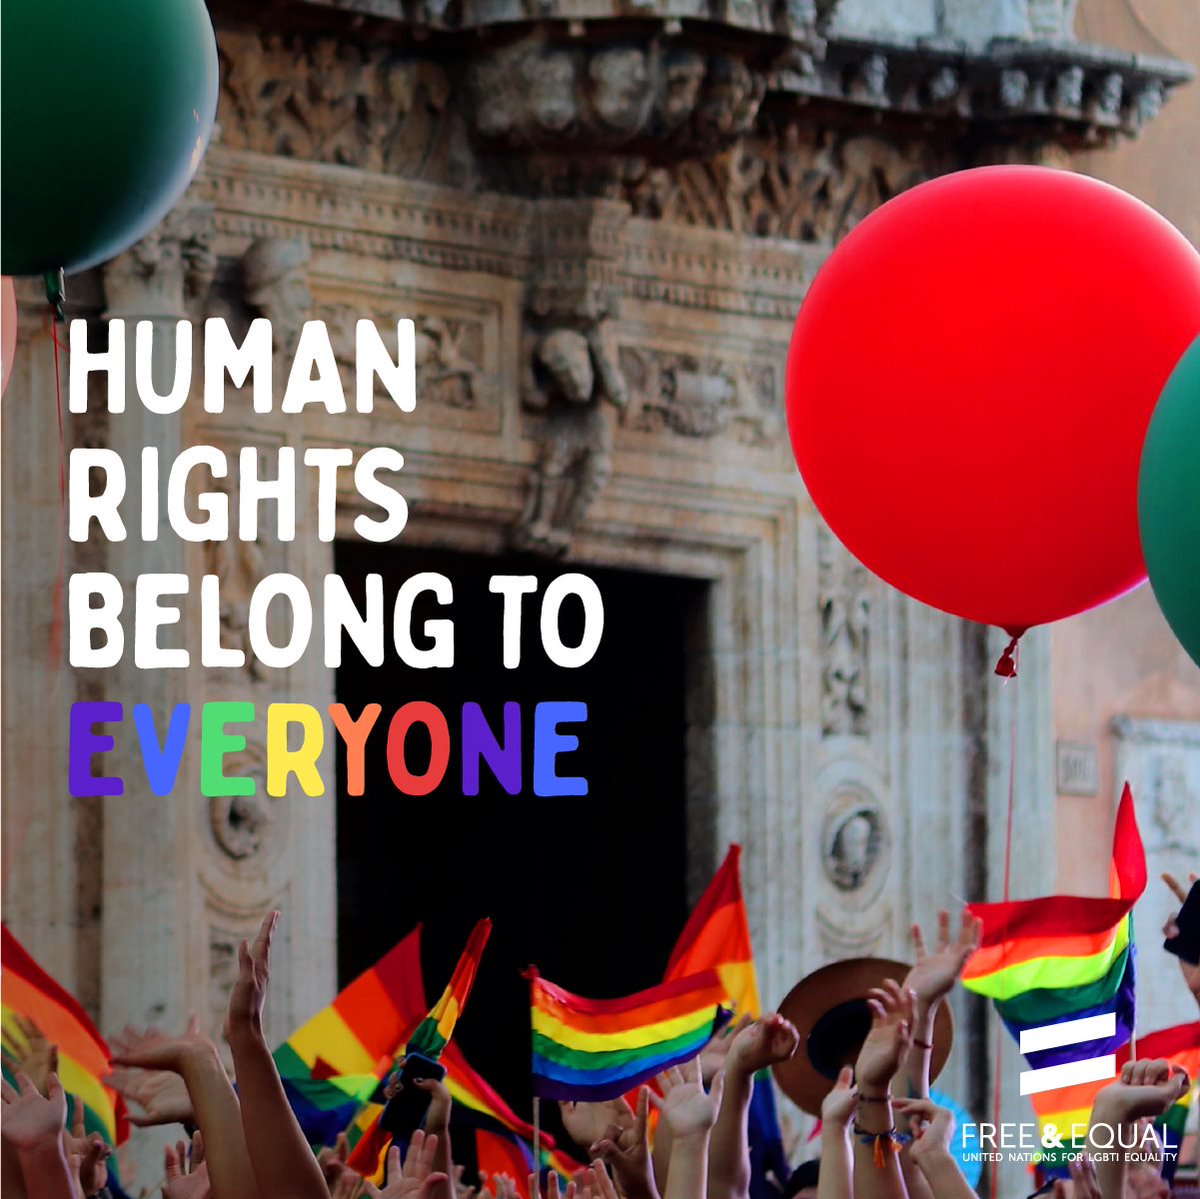 LGBTIQ+ rights are HUMAN rights.

#StandUp4HumanRights on Wednesday’s International Day against Homophobia, Transphobia & Biphobia and every day.

unfe.org #IDAHOBIT via UN @free_equal